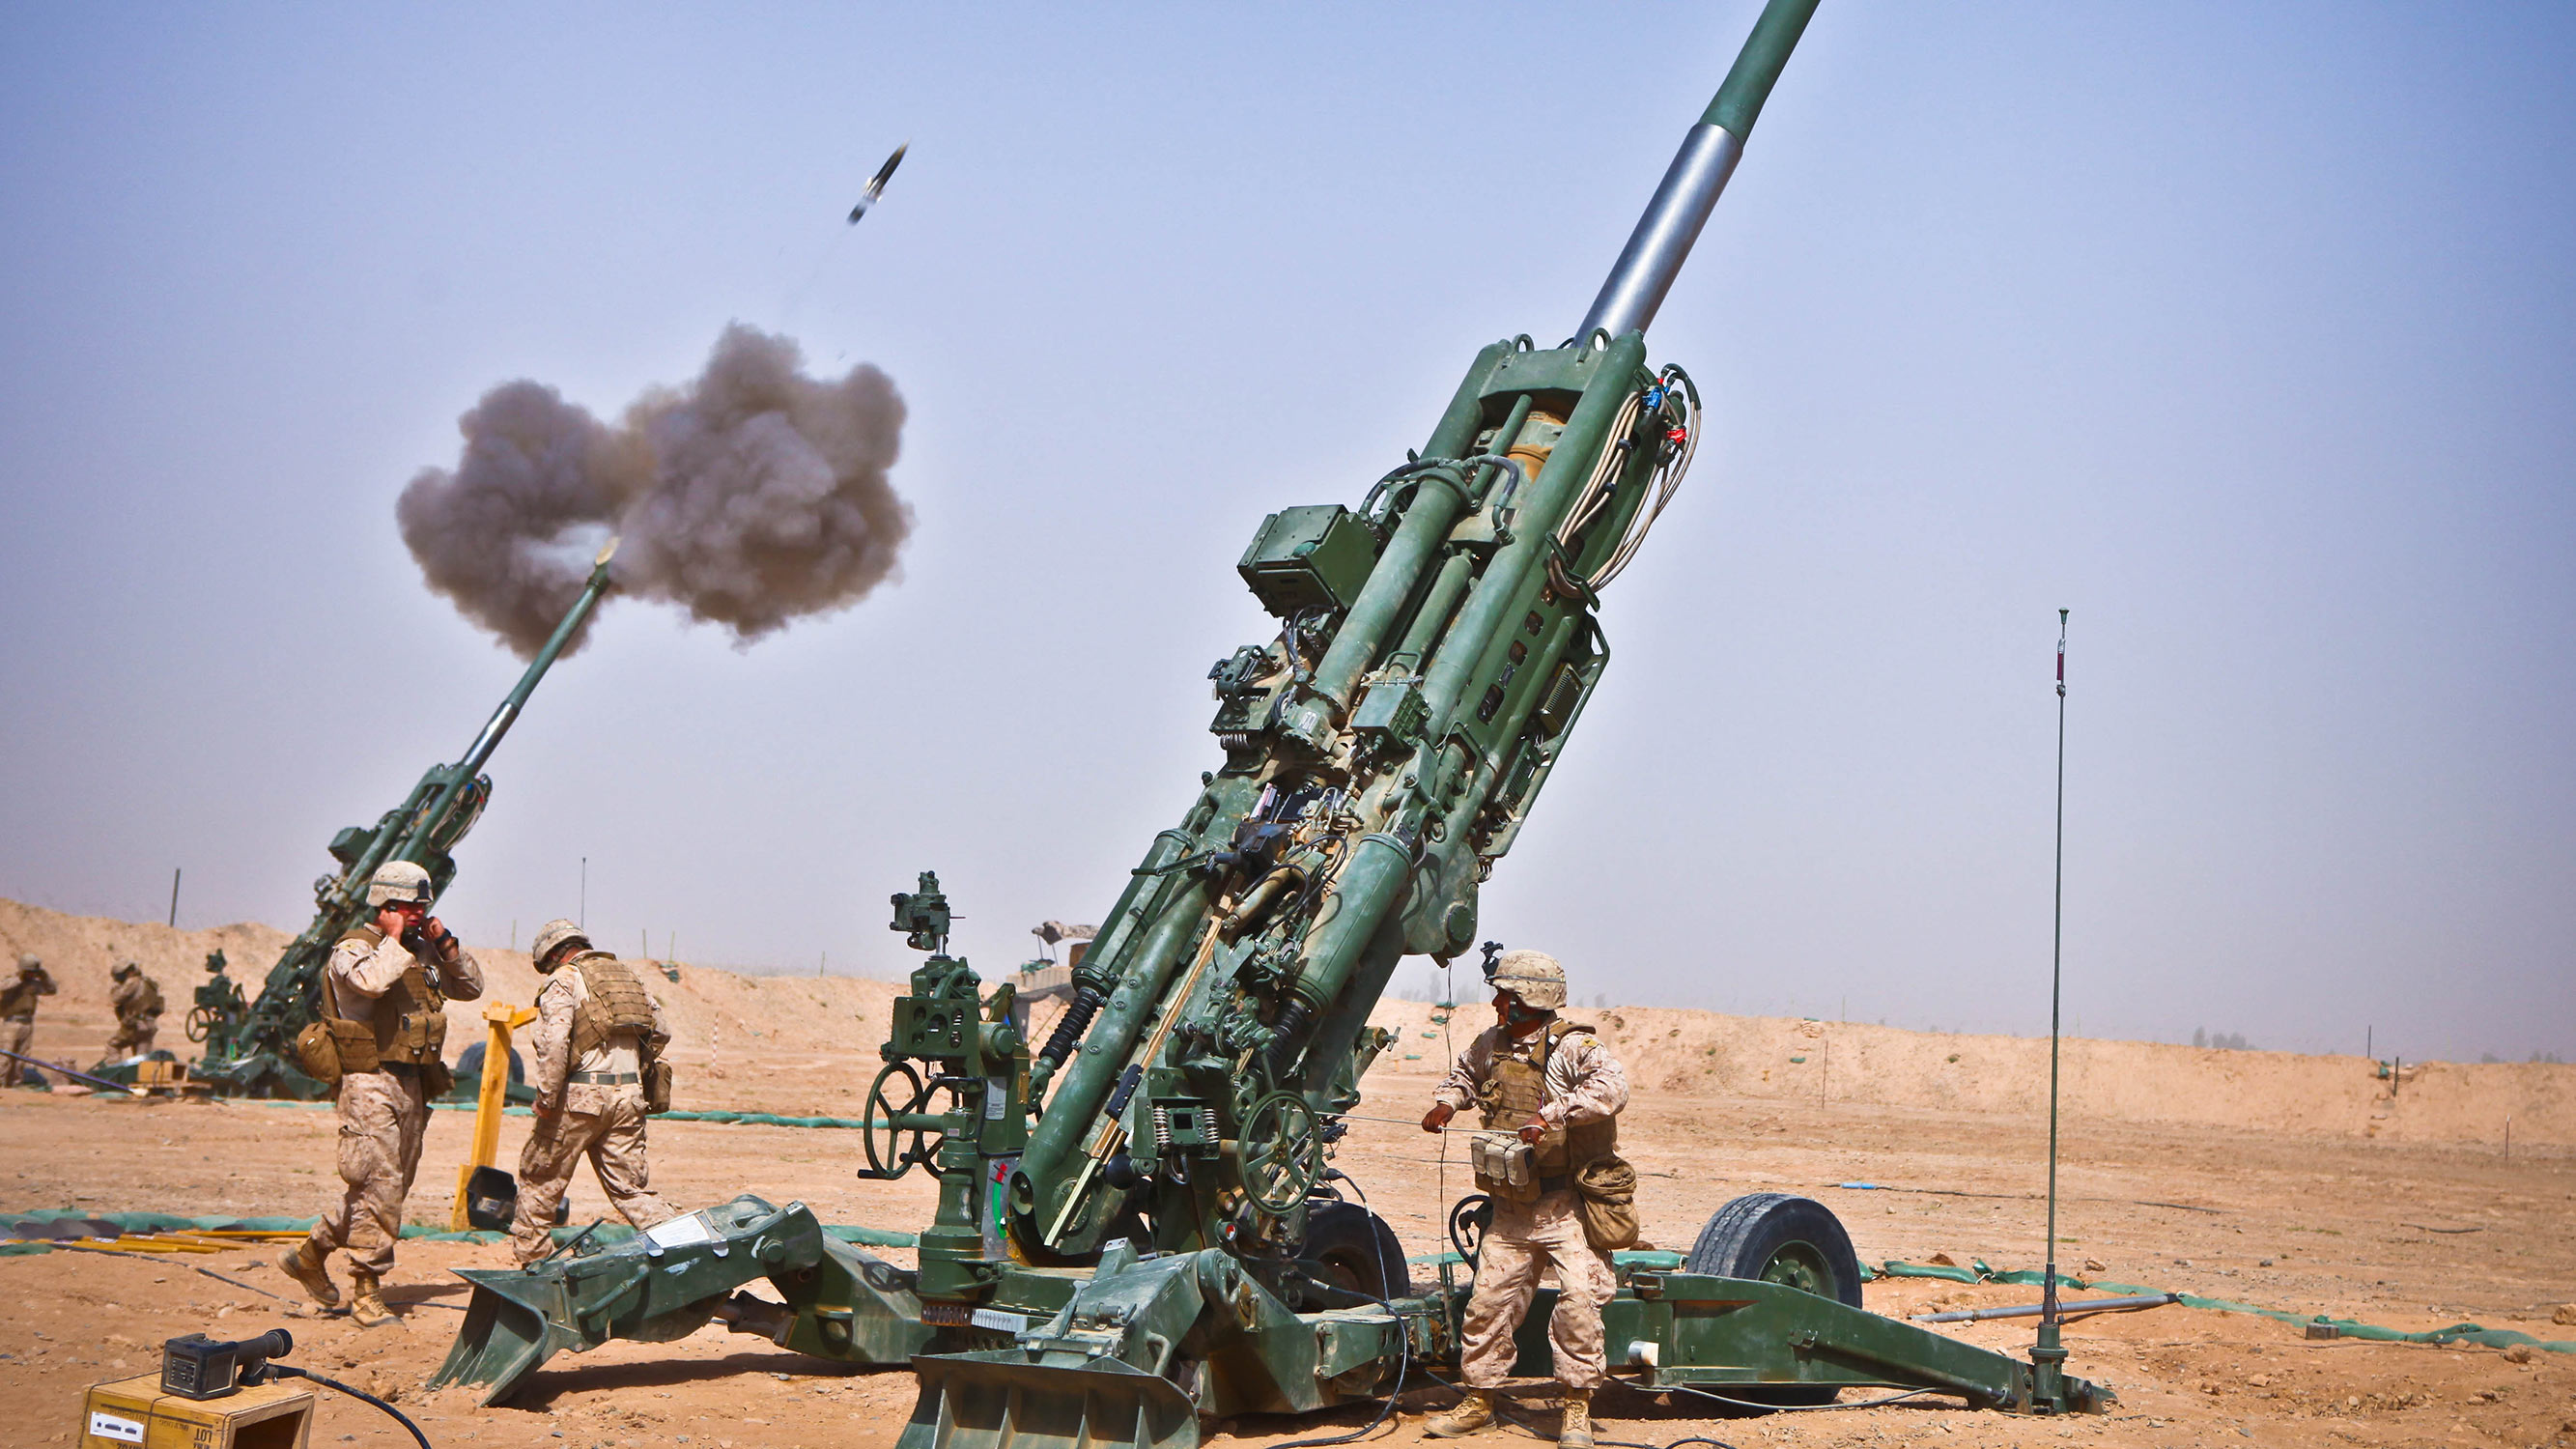 M982 Excalibur round fired from M777 howitzer